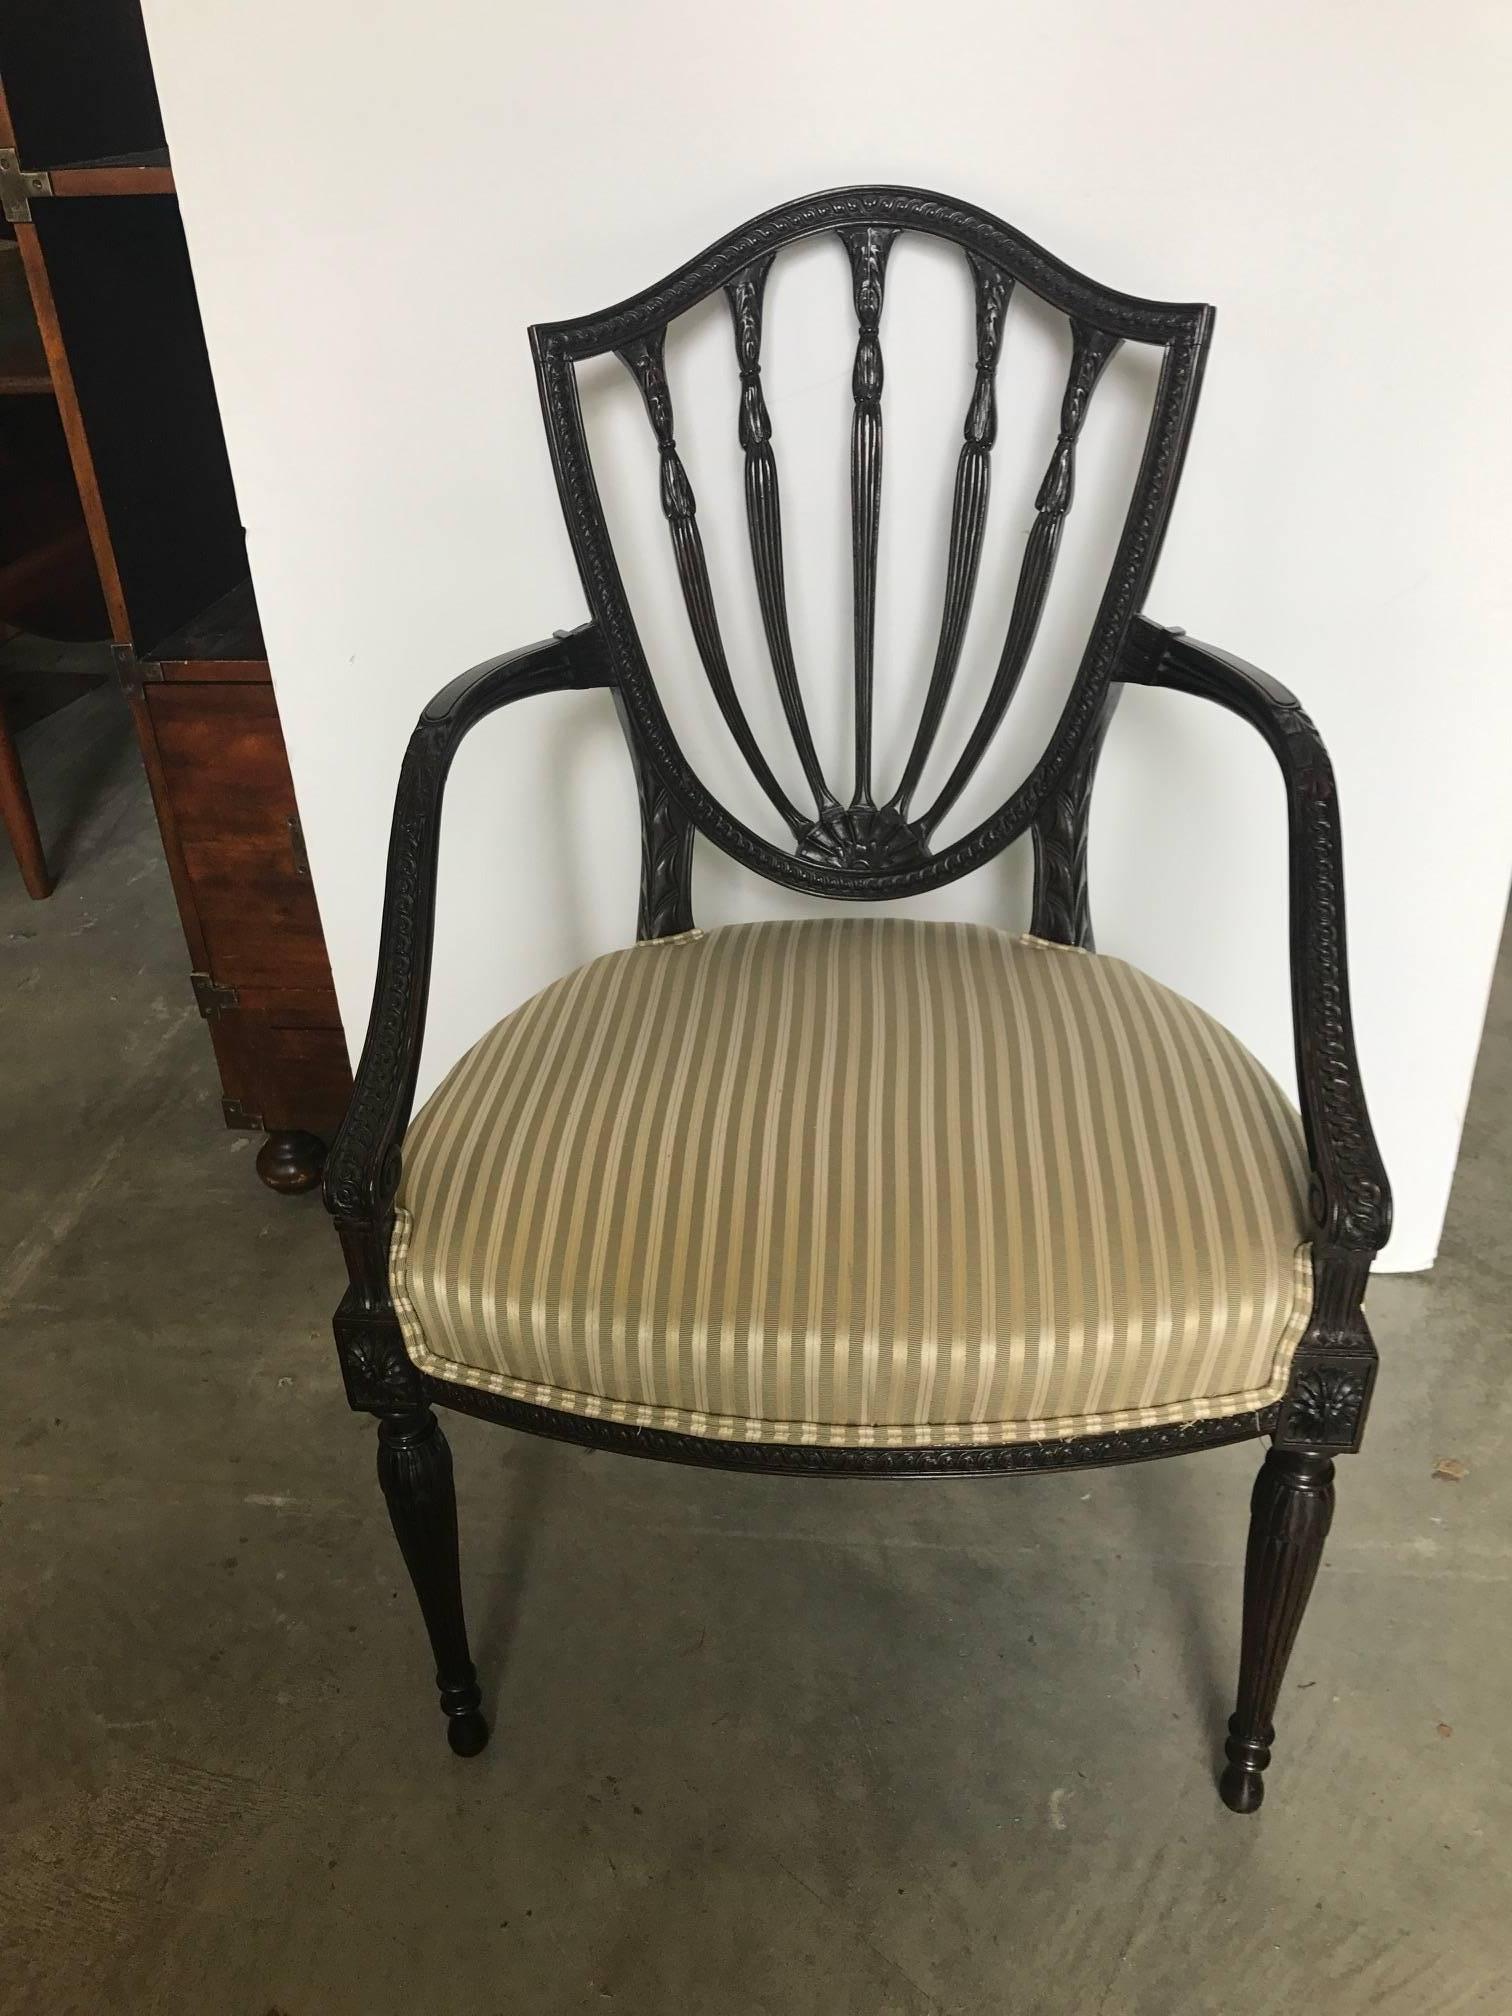 Elegant and graceful hand carved mid-19th century shield back Hepplewhite armchair. The dark mahogany frame is expertly carved all along the frame. The corners have rosettes with tapered reeded legs. The seat is an hourglass coil spring construction